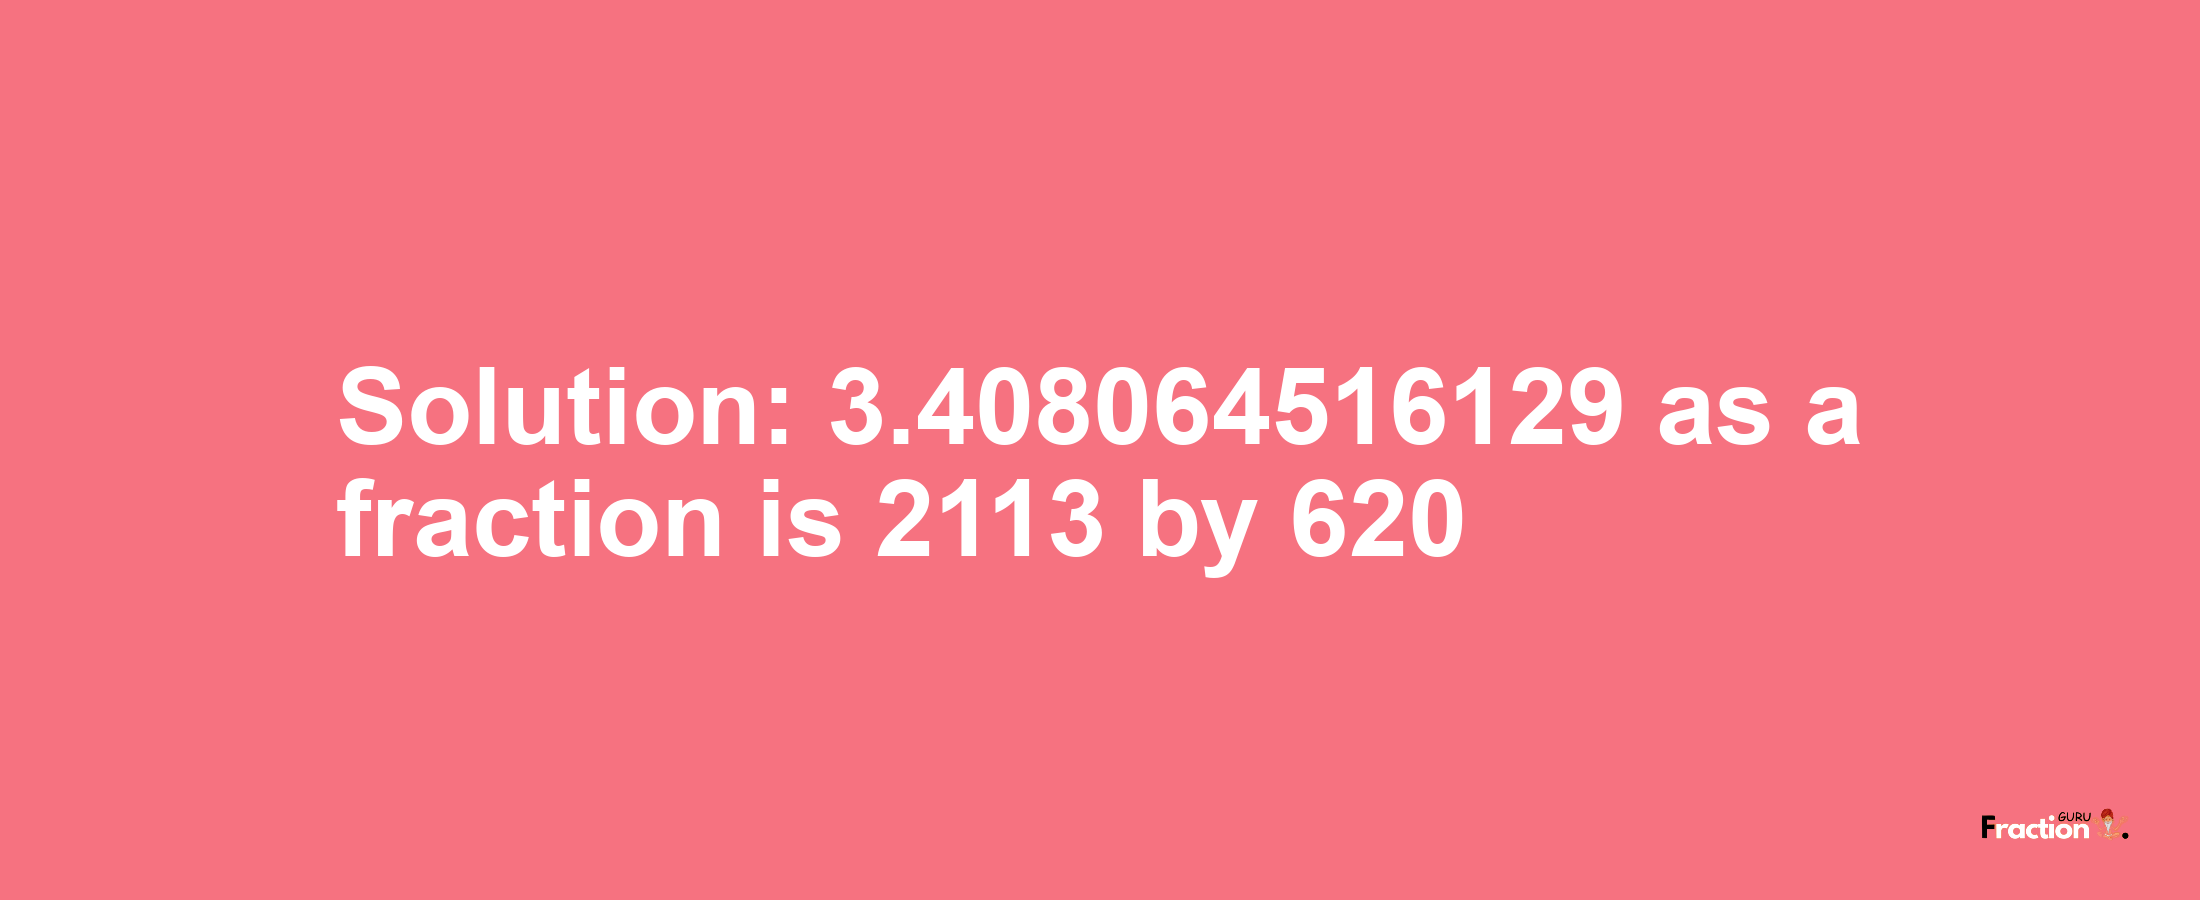 Solution:3.408064516129 as a fraction is 2113/620